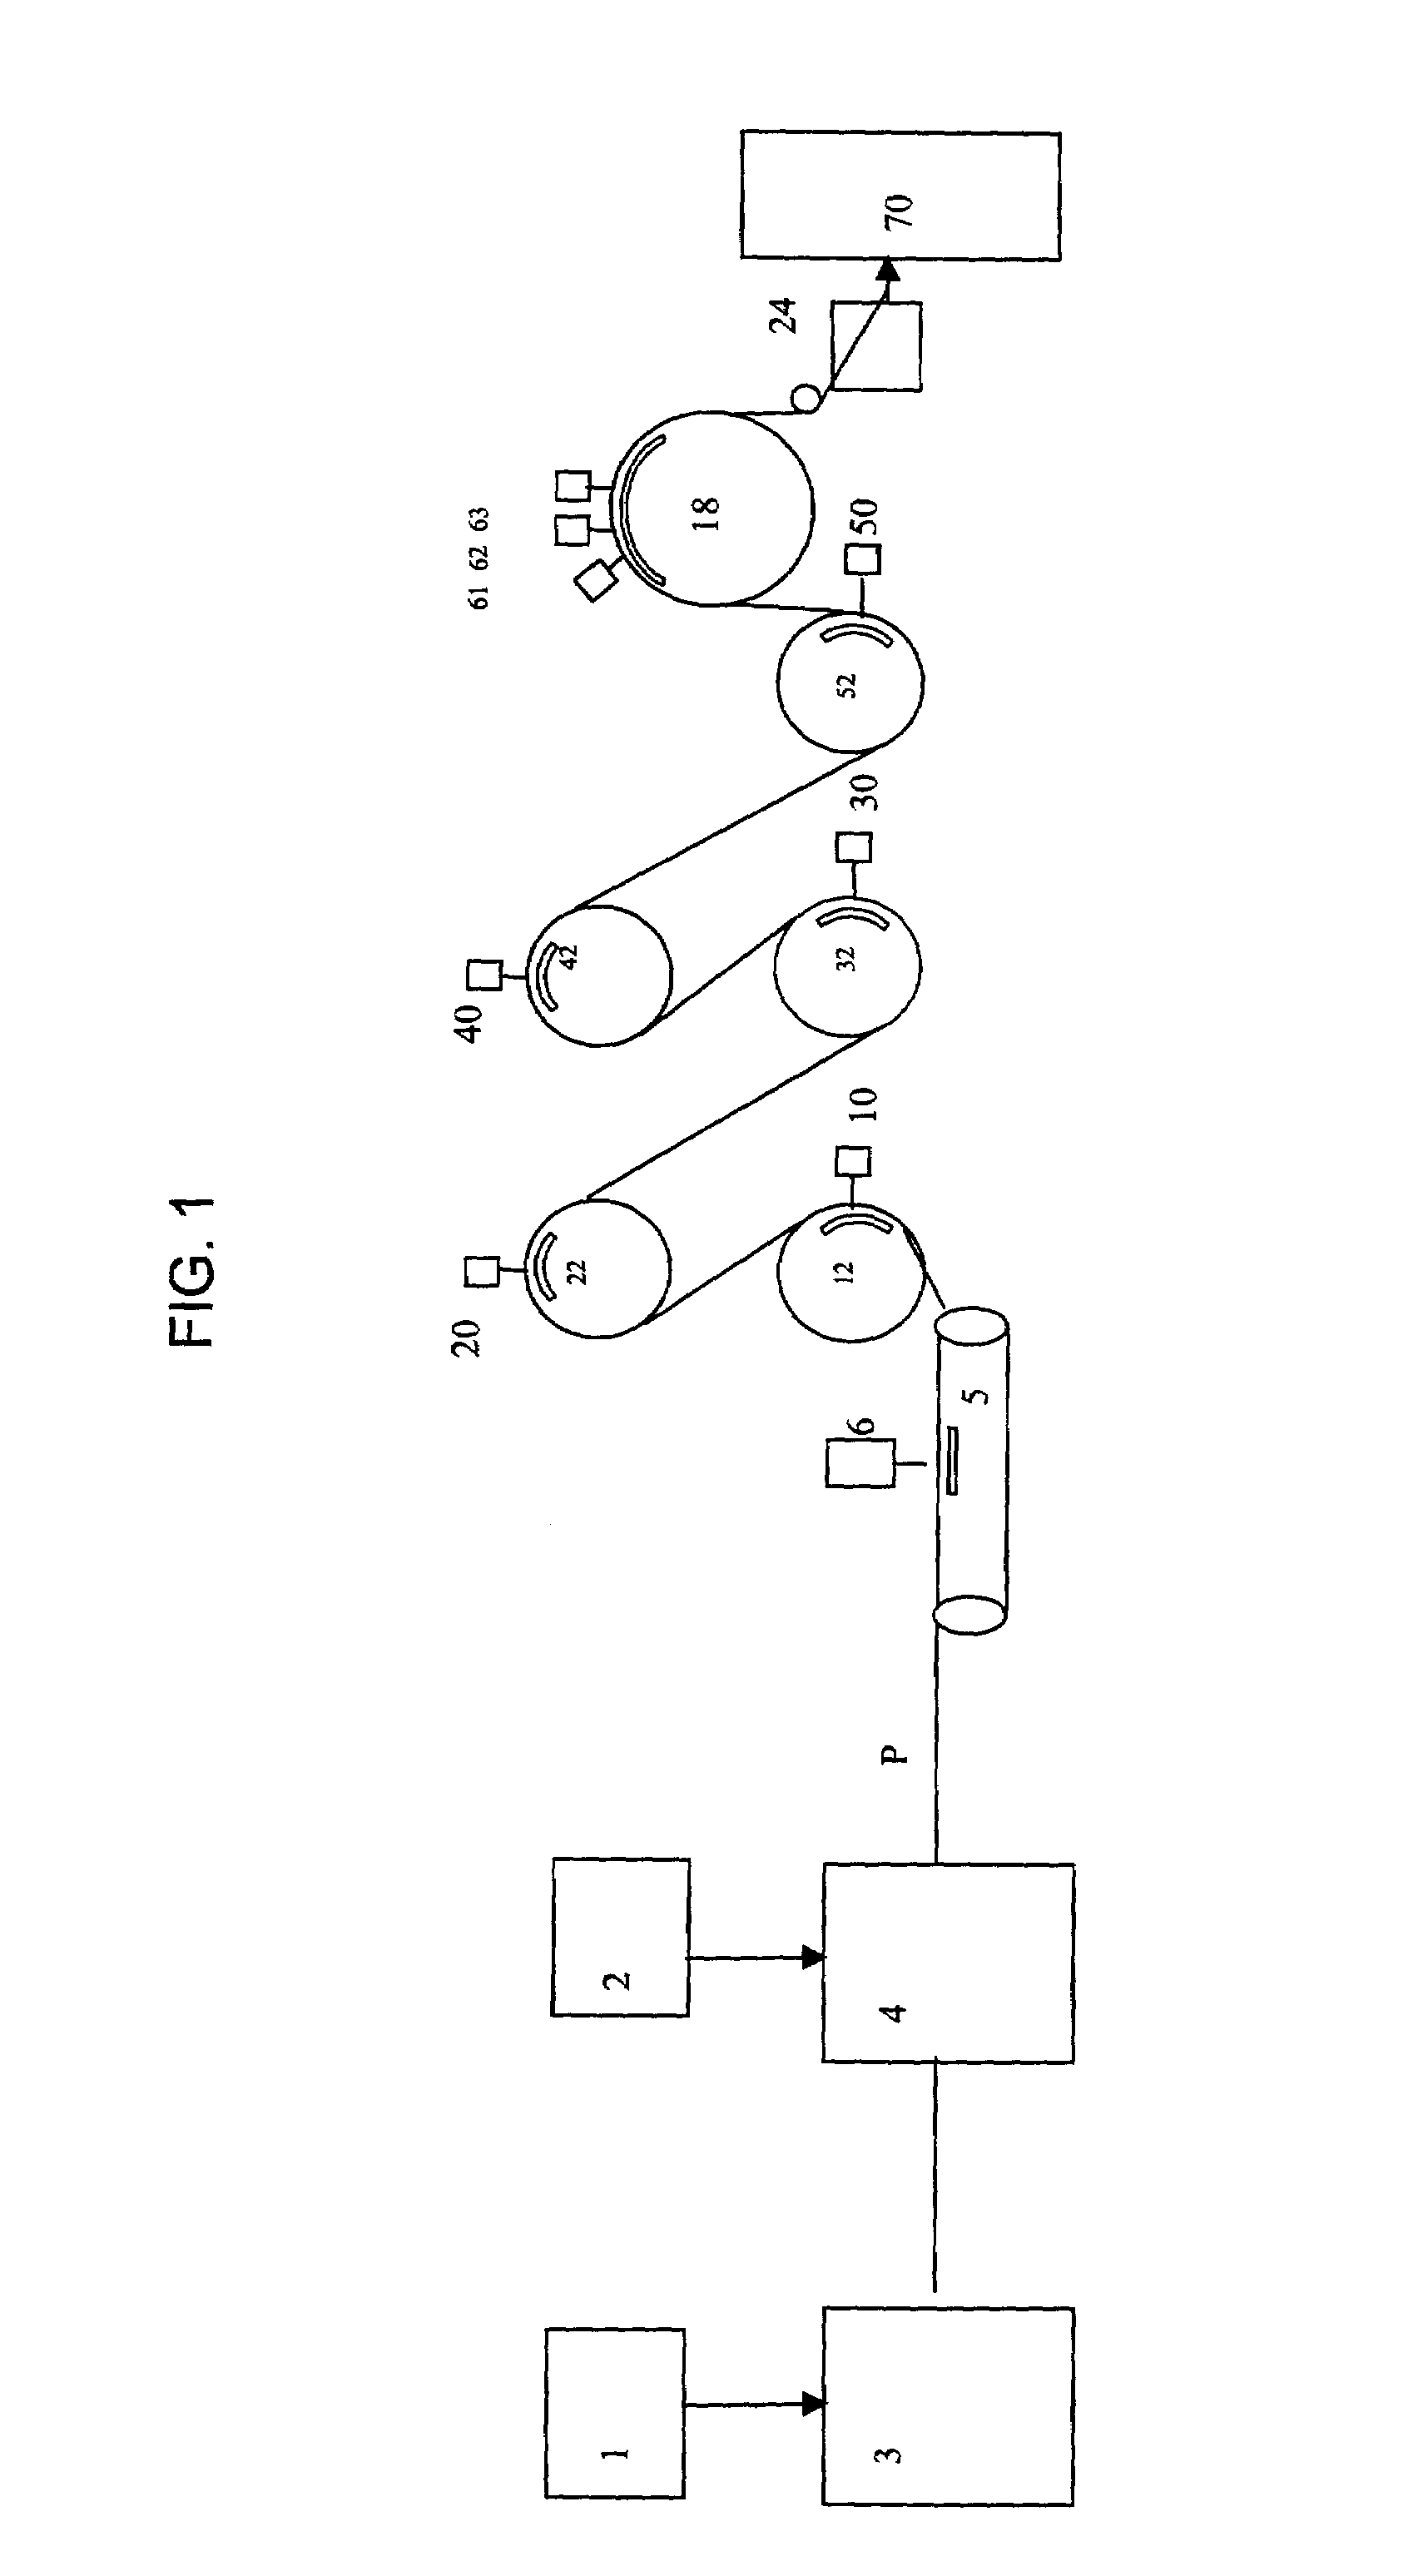 Imaged nonwoven fabric comprising lyocell fibers